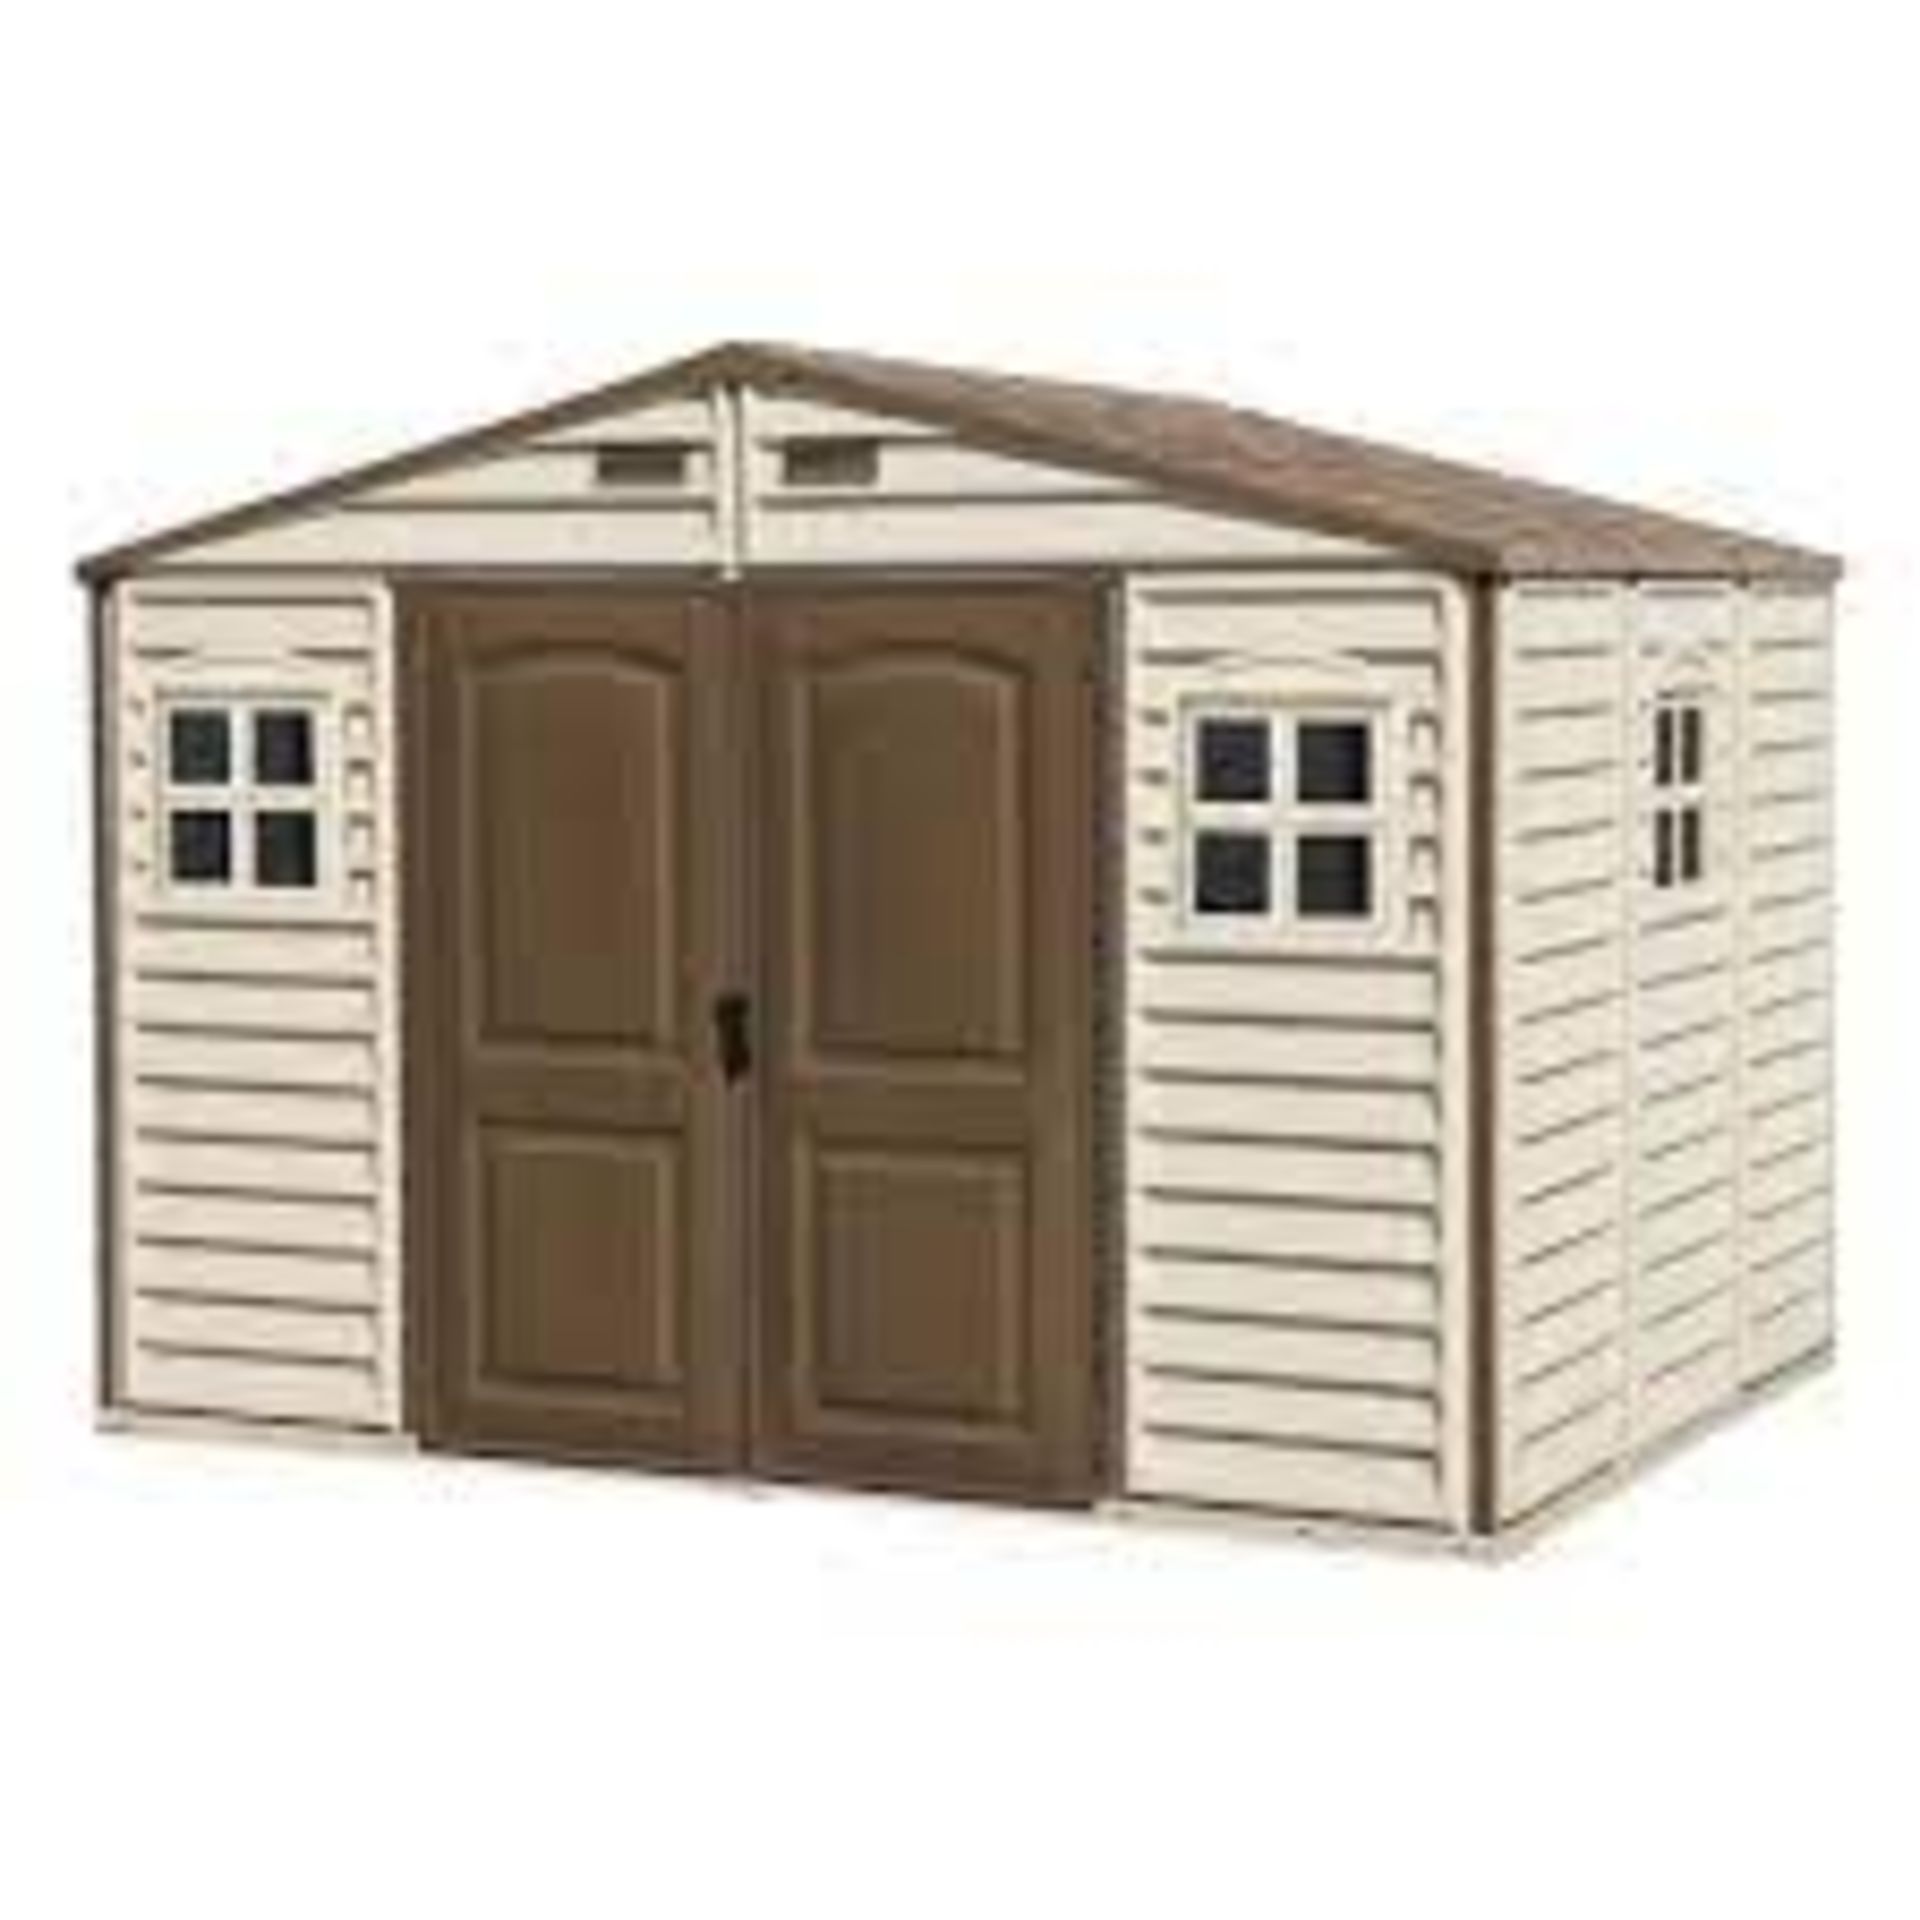 RRP £1840 Lot To Contain 3 Part Lot Furniture: Duramax 10ft x 8ft Shed (BOX 2/2 ONLY - BOX 1/2 NOT